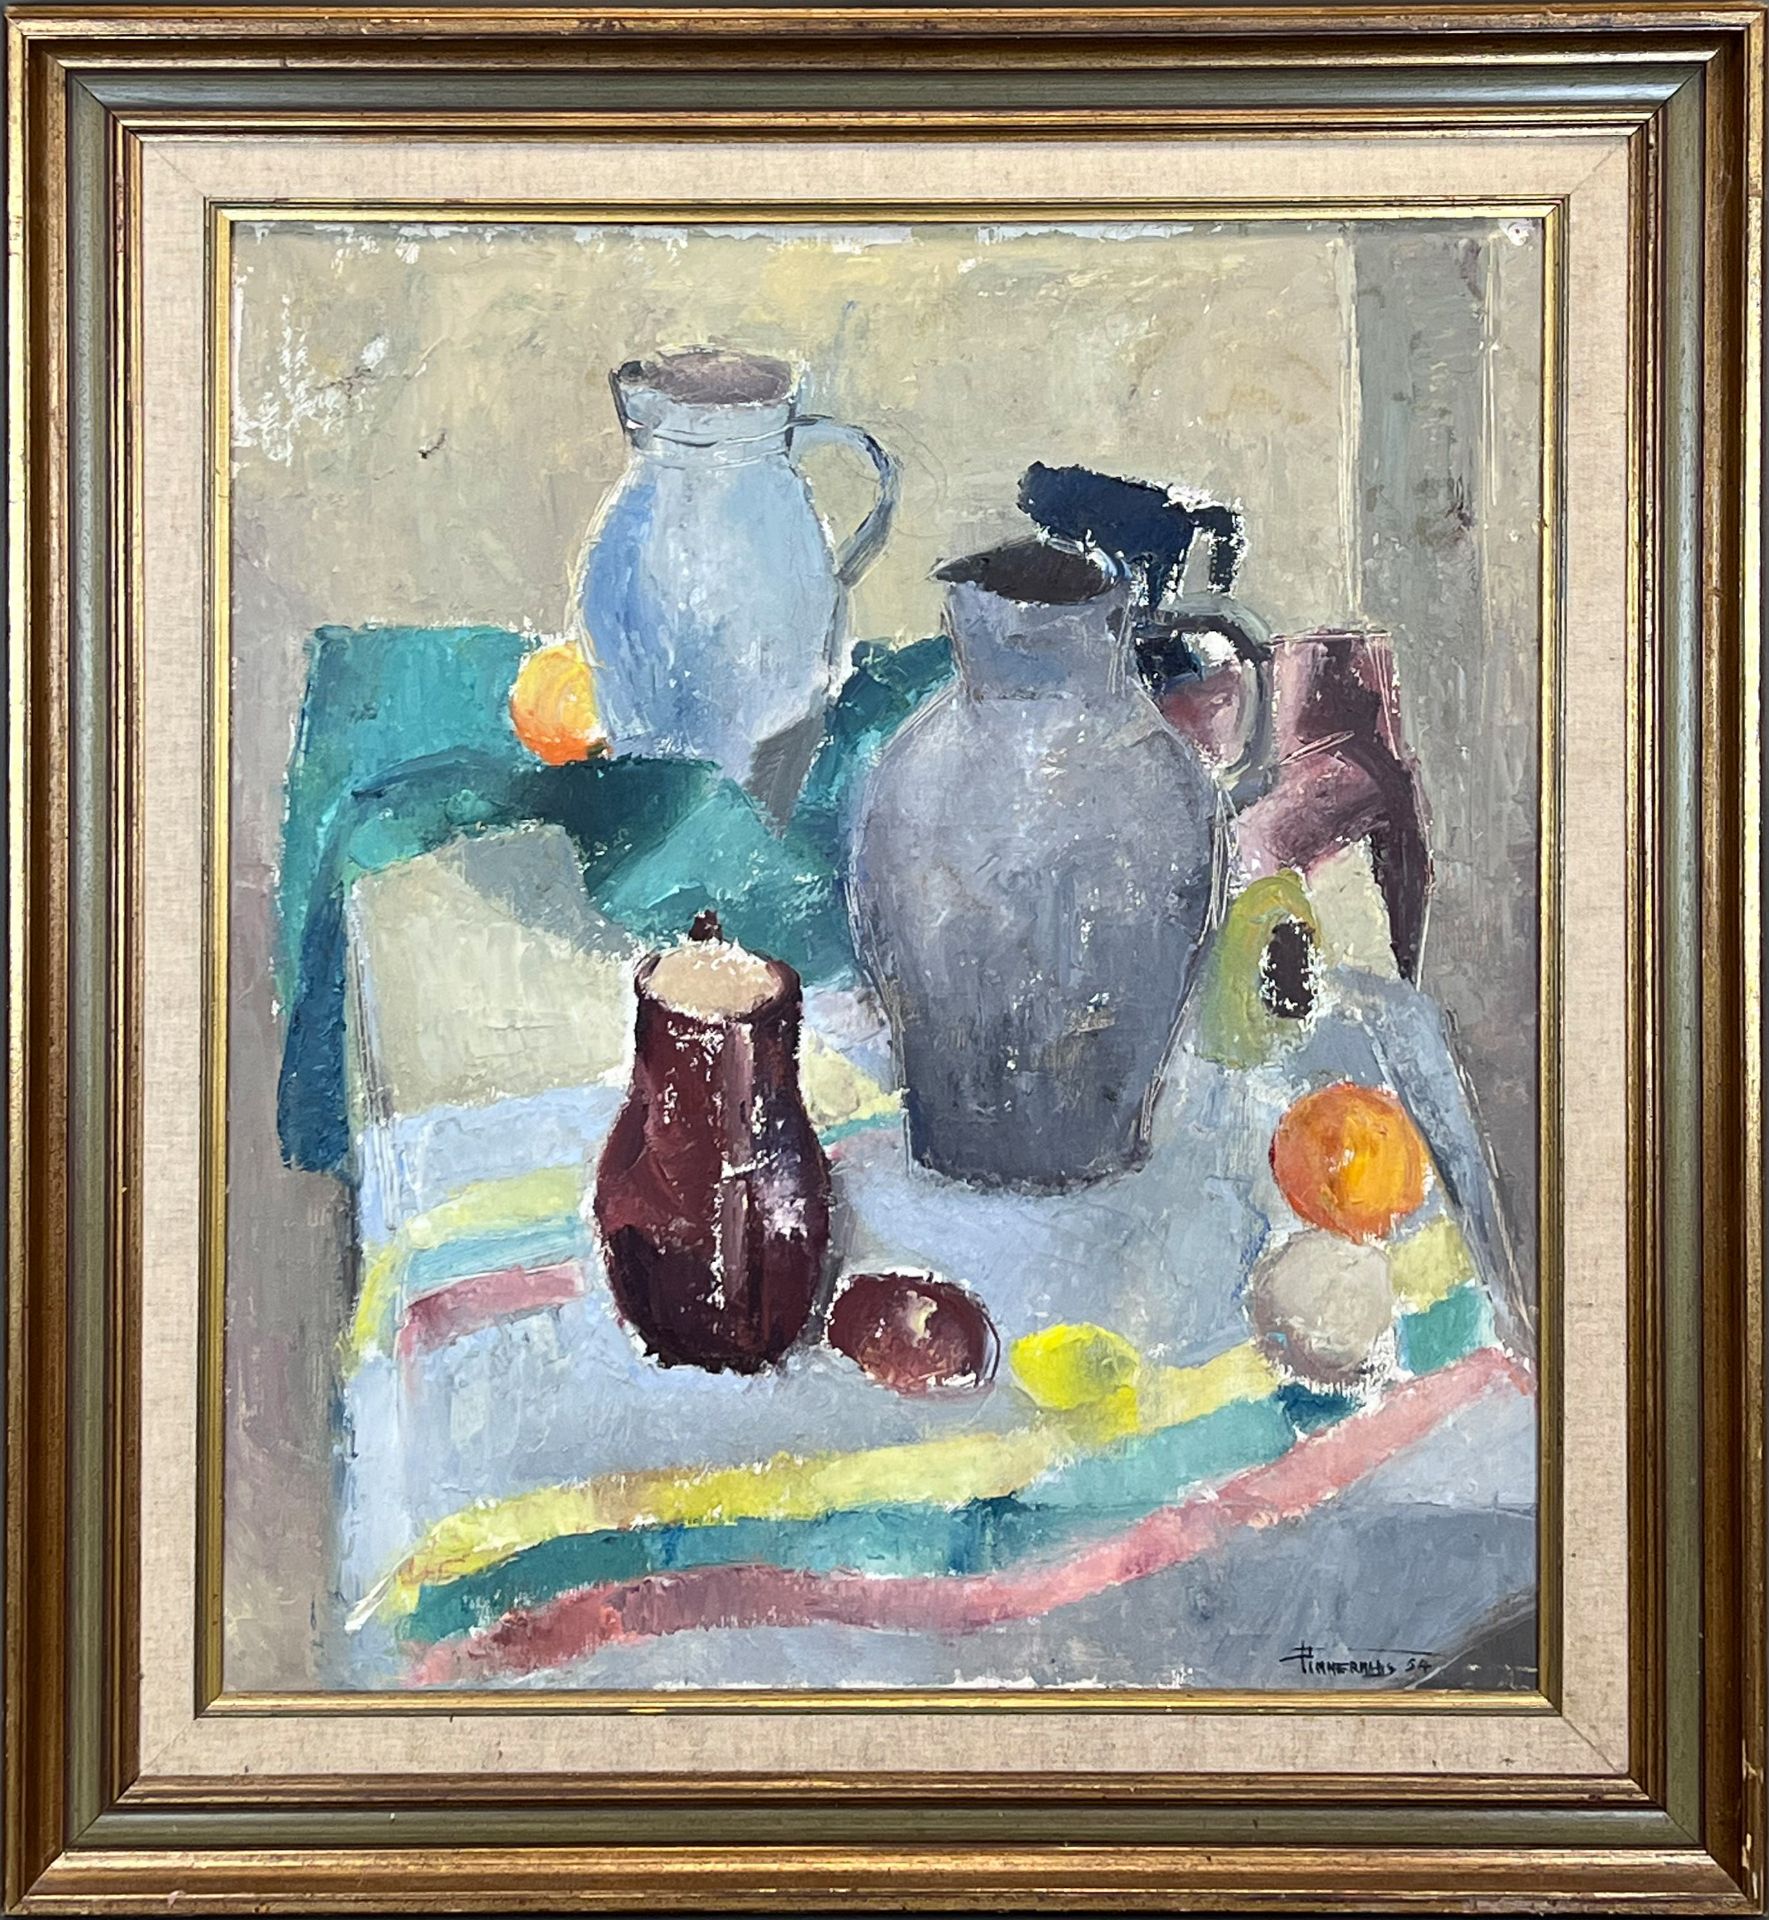 Jean TIMMERMANS (1899 - 1986). Still life with jugs and fruit. Dated 1954. - Image 2 of 13